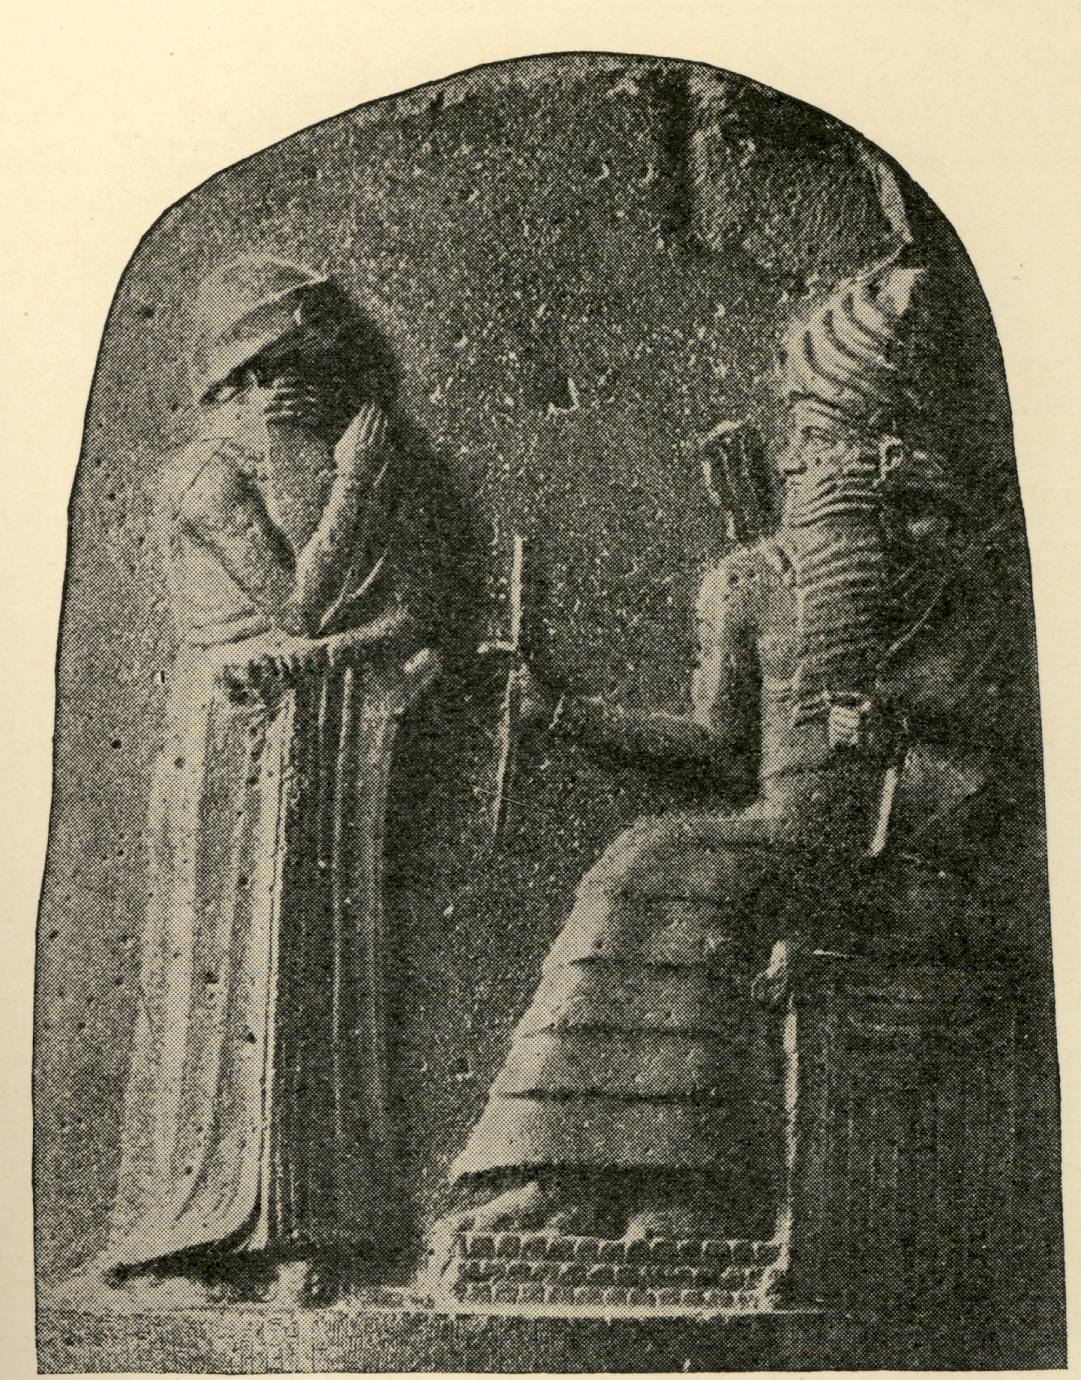 Shamash & giant mixed-breed Babylonian King Hammurabi the Great, kingship established in heaven was brought to Earth and given to earthling mixed-breeds, who were protected by their bloodline ancestor alien giant gods, sons of god(s) who came down to Earth, & had sex with the daughters of men, producing offspring who were much bigger, stronger, faster, smarter, & lived much longer than the earthlings